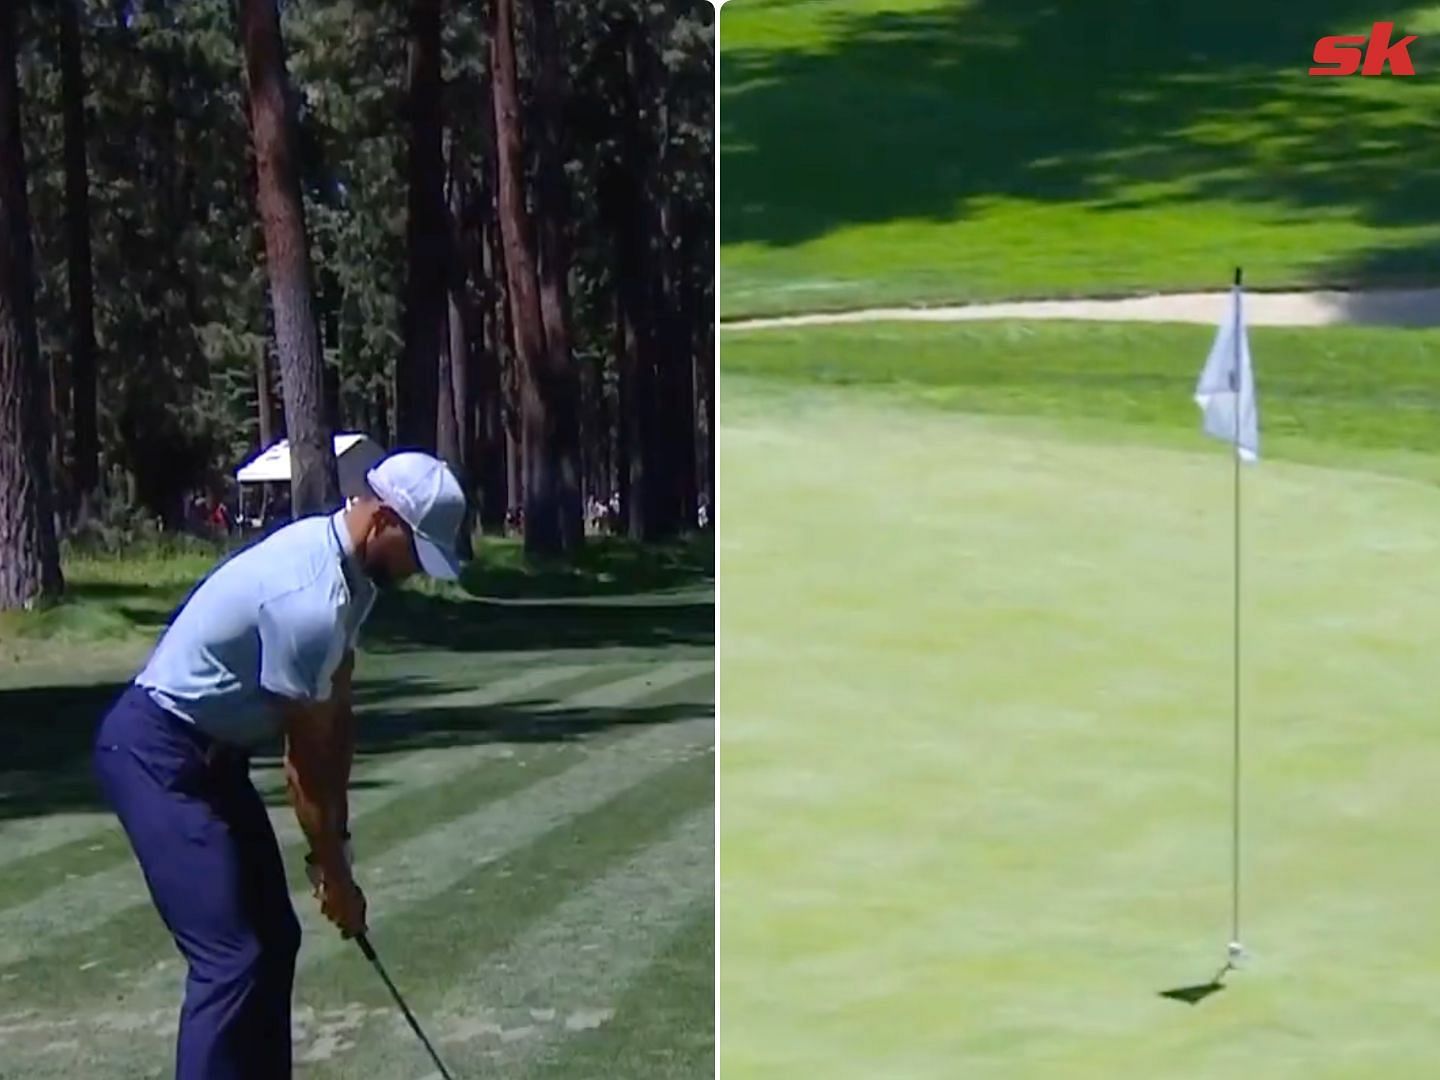 Steph Curry stuns himself with incredible hole-in-one shot at American Century Championship